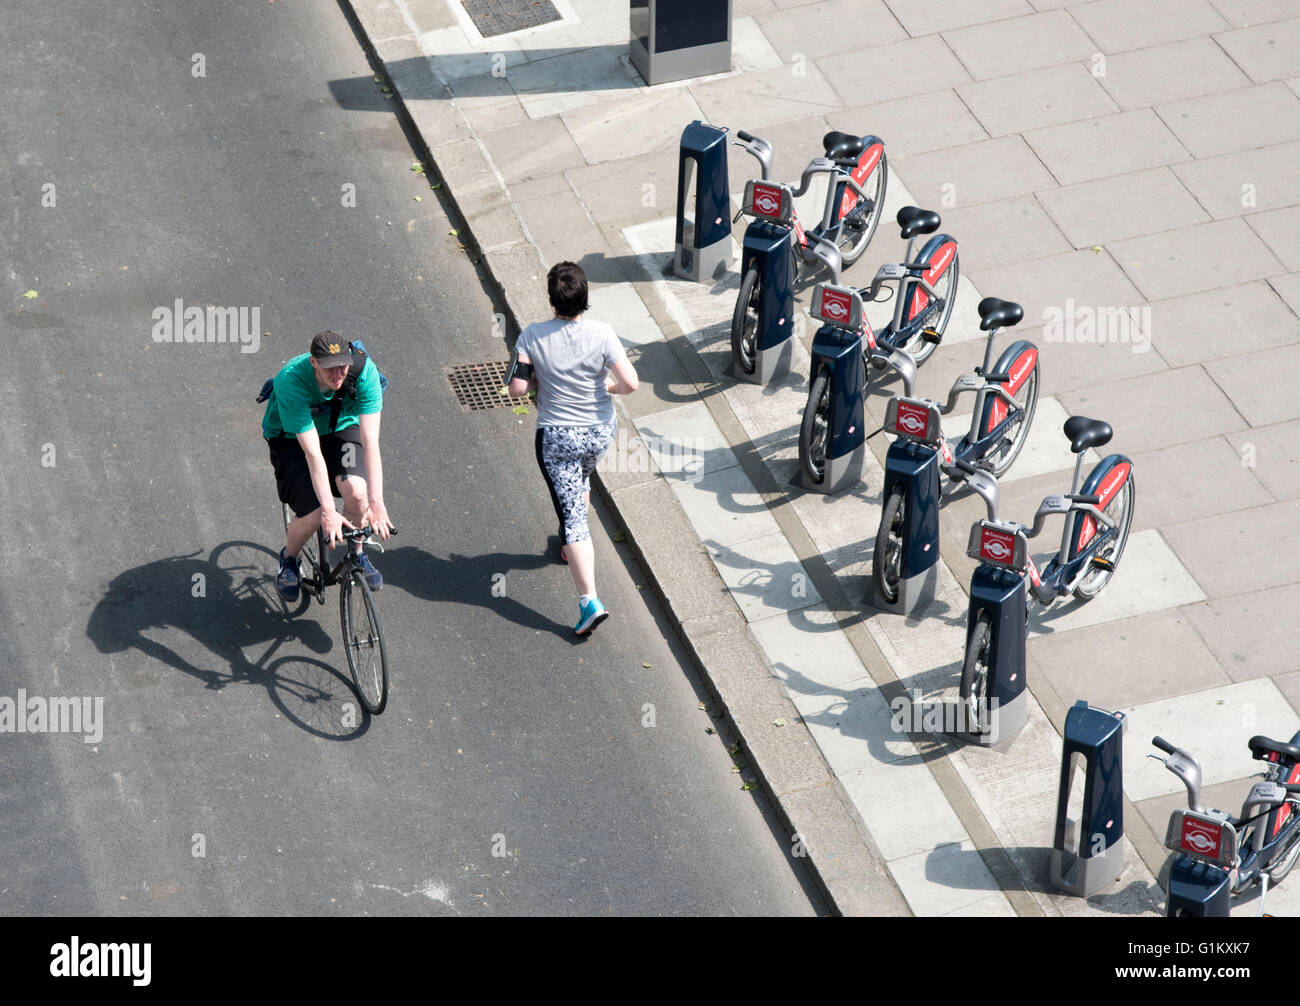 cycle superhighway Embankment joggers cyclists Stock Photo